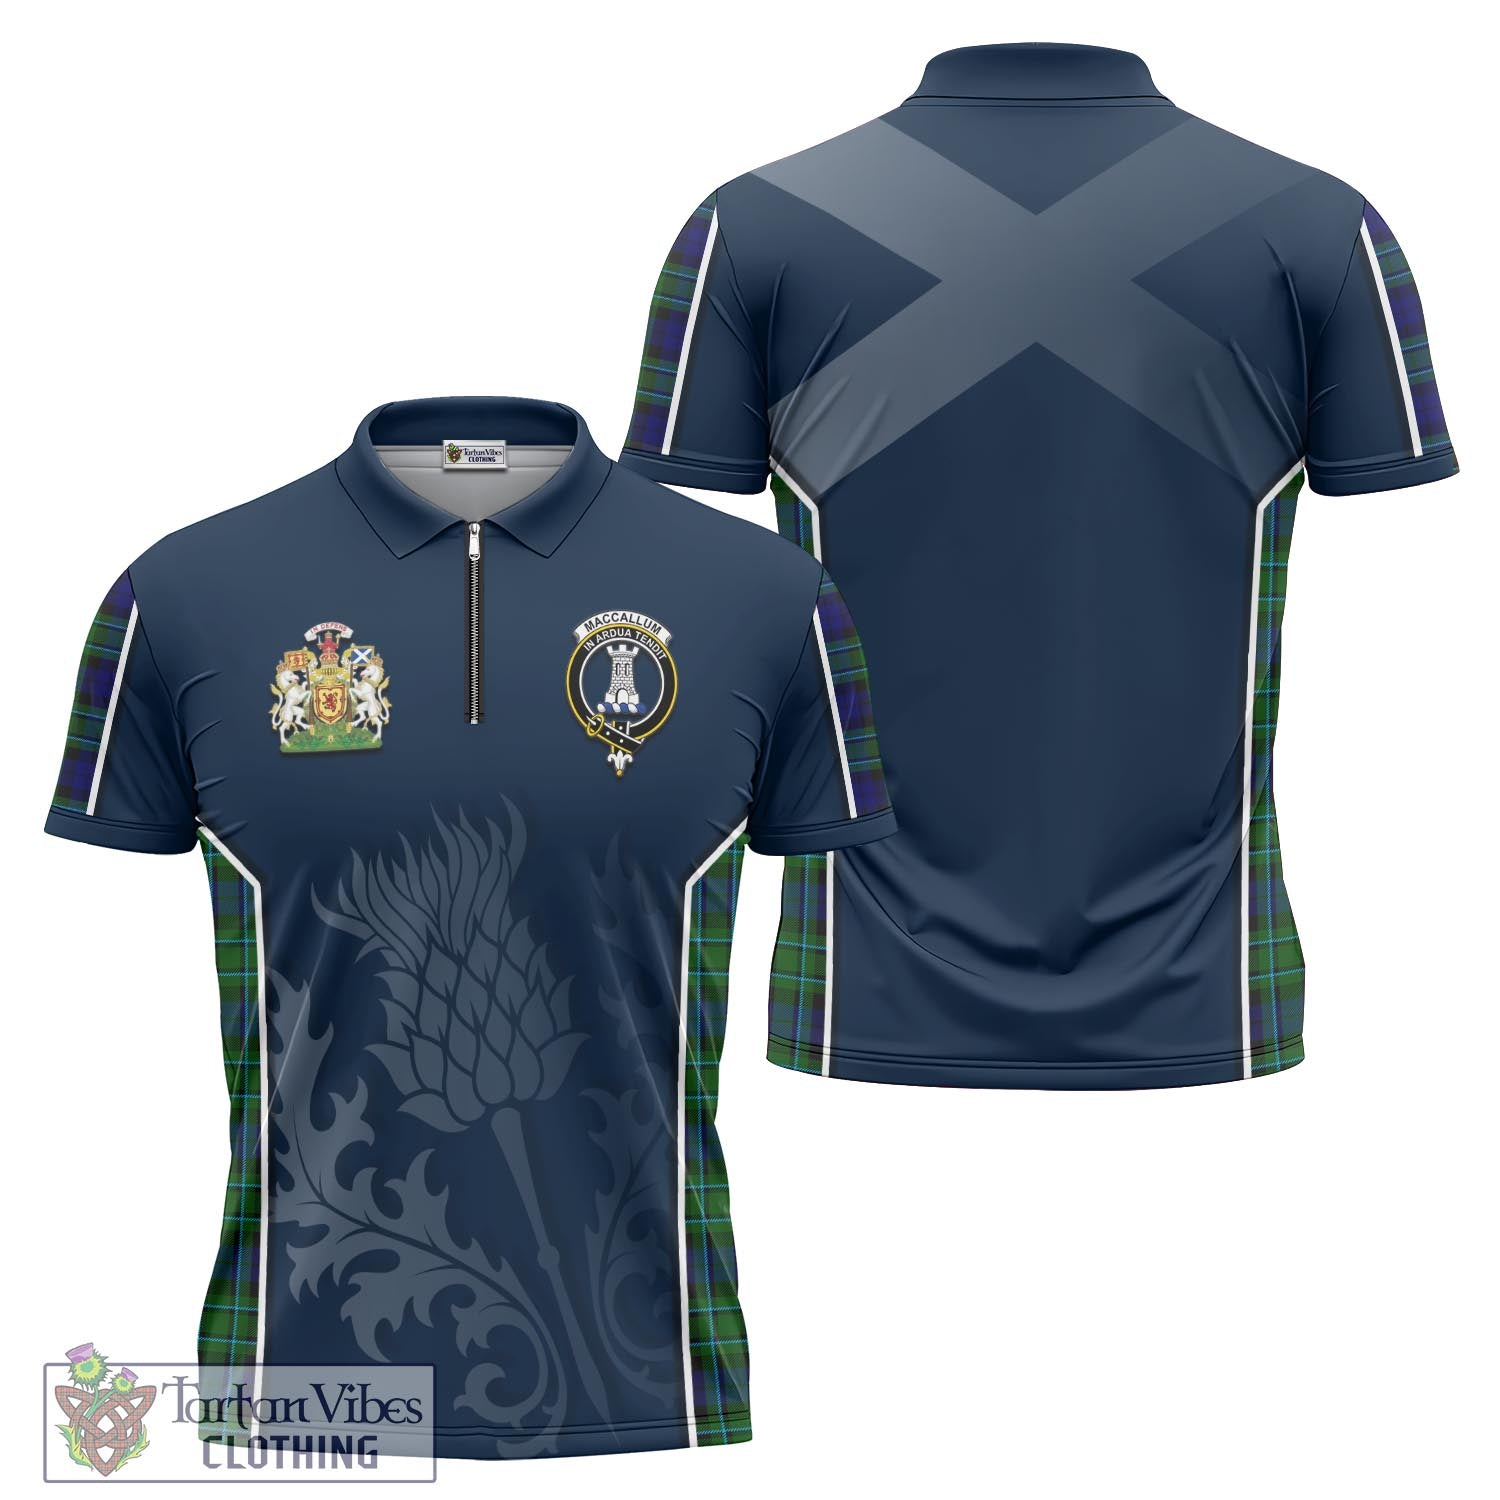 Tartan Vibes Clothing MacCallum Modern Tartan Zipper Polo Shirt with Family Crest and Scottish Thistle Vibes Sport Style